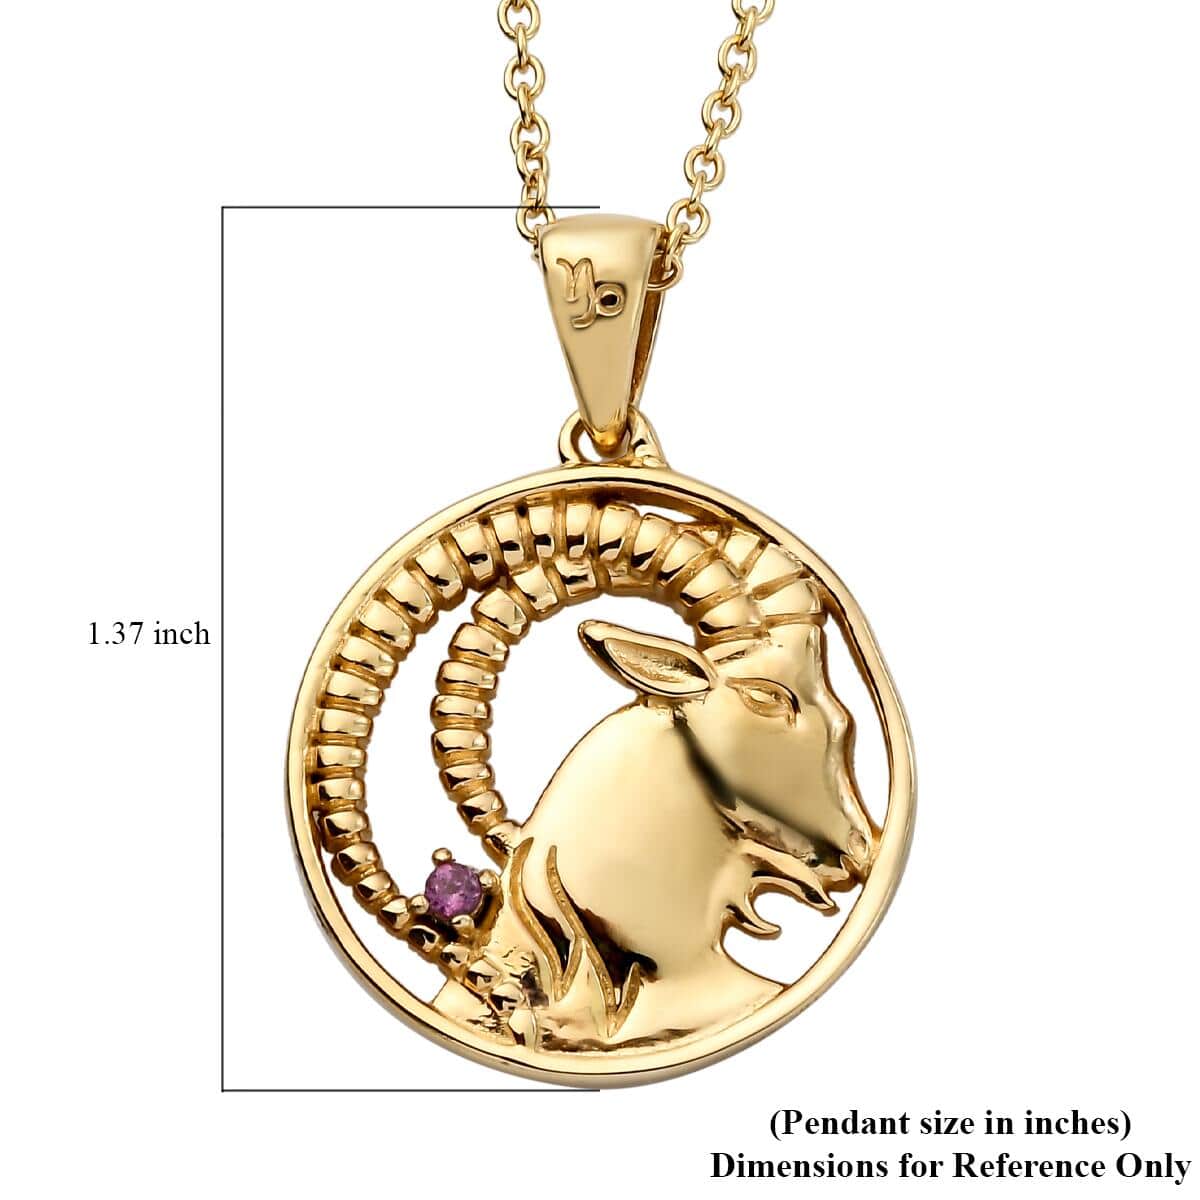 KARIS Orissa Rhodolite Garnet Capricorn Zodiac Pendant Necklace (20 Inches) in ION Plated 18K YG and ION Plated YG Stainless Steel 0.05 ctw image number 5